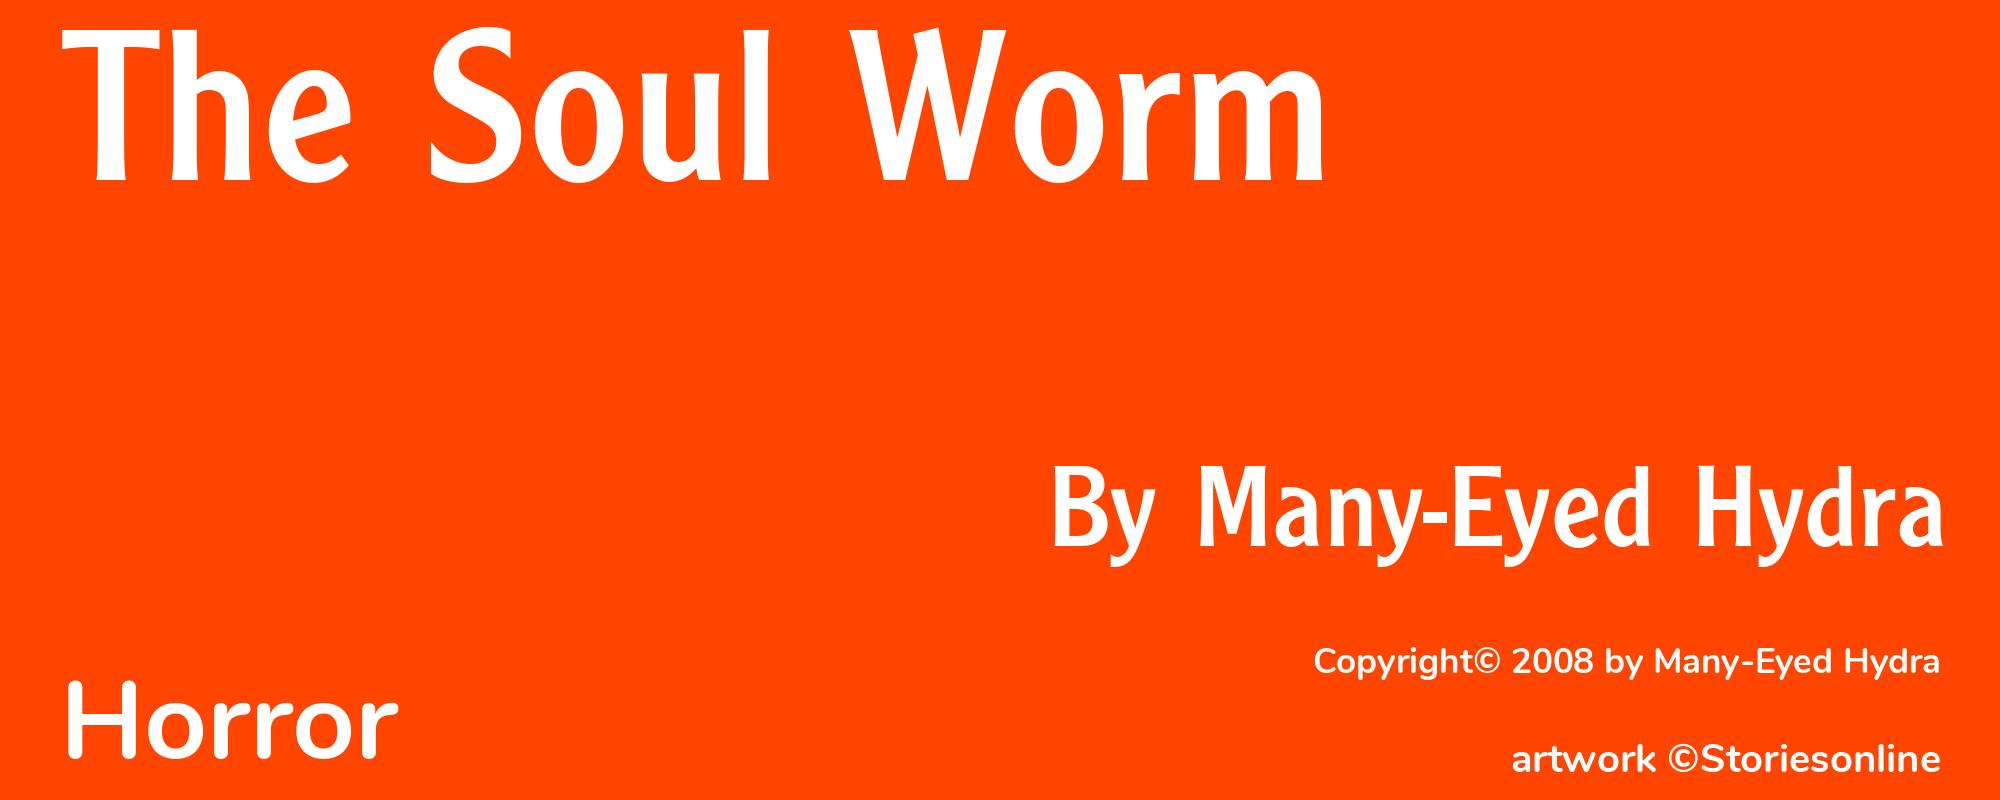 The Soul Worm - Cover